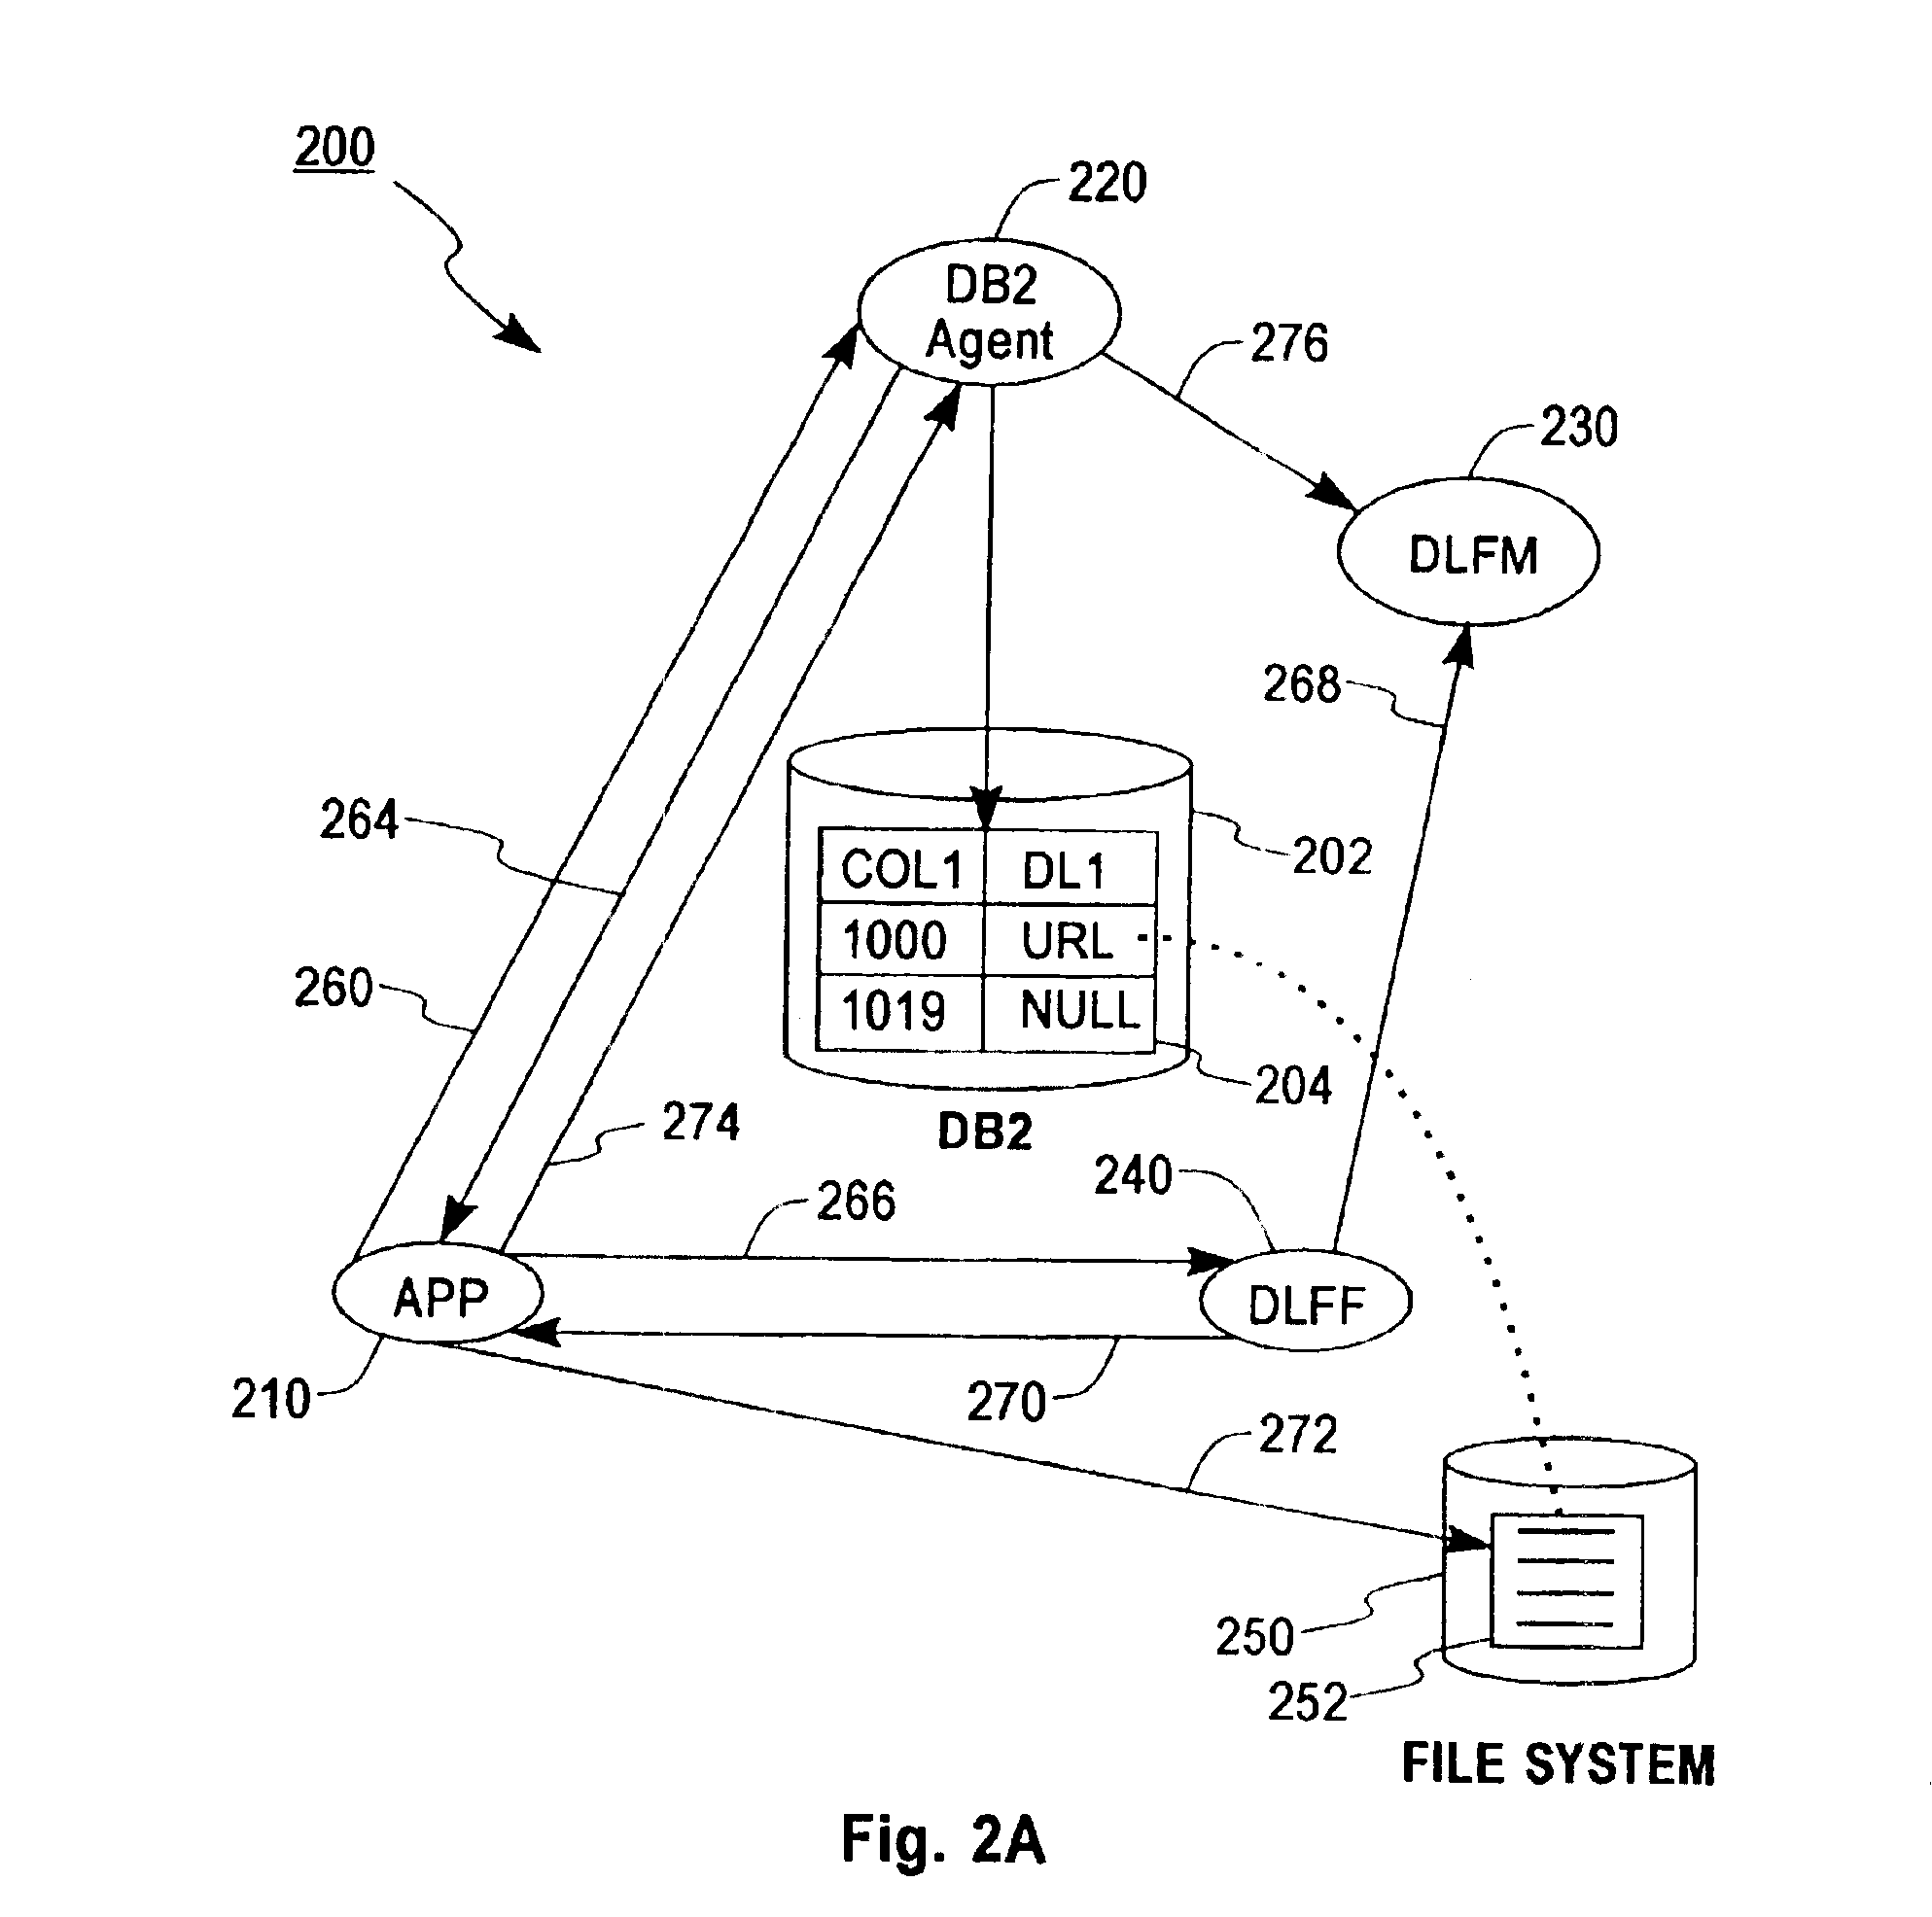 Method of maintaining data consistency in a loose transaction model